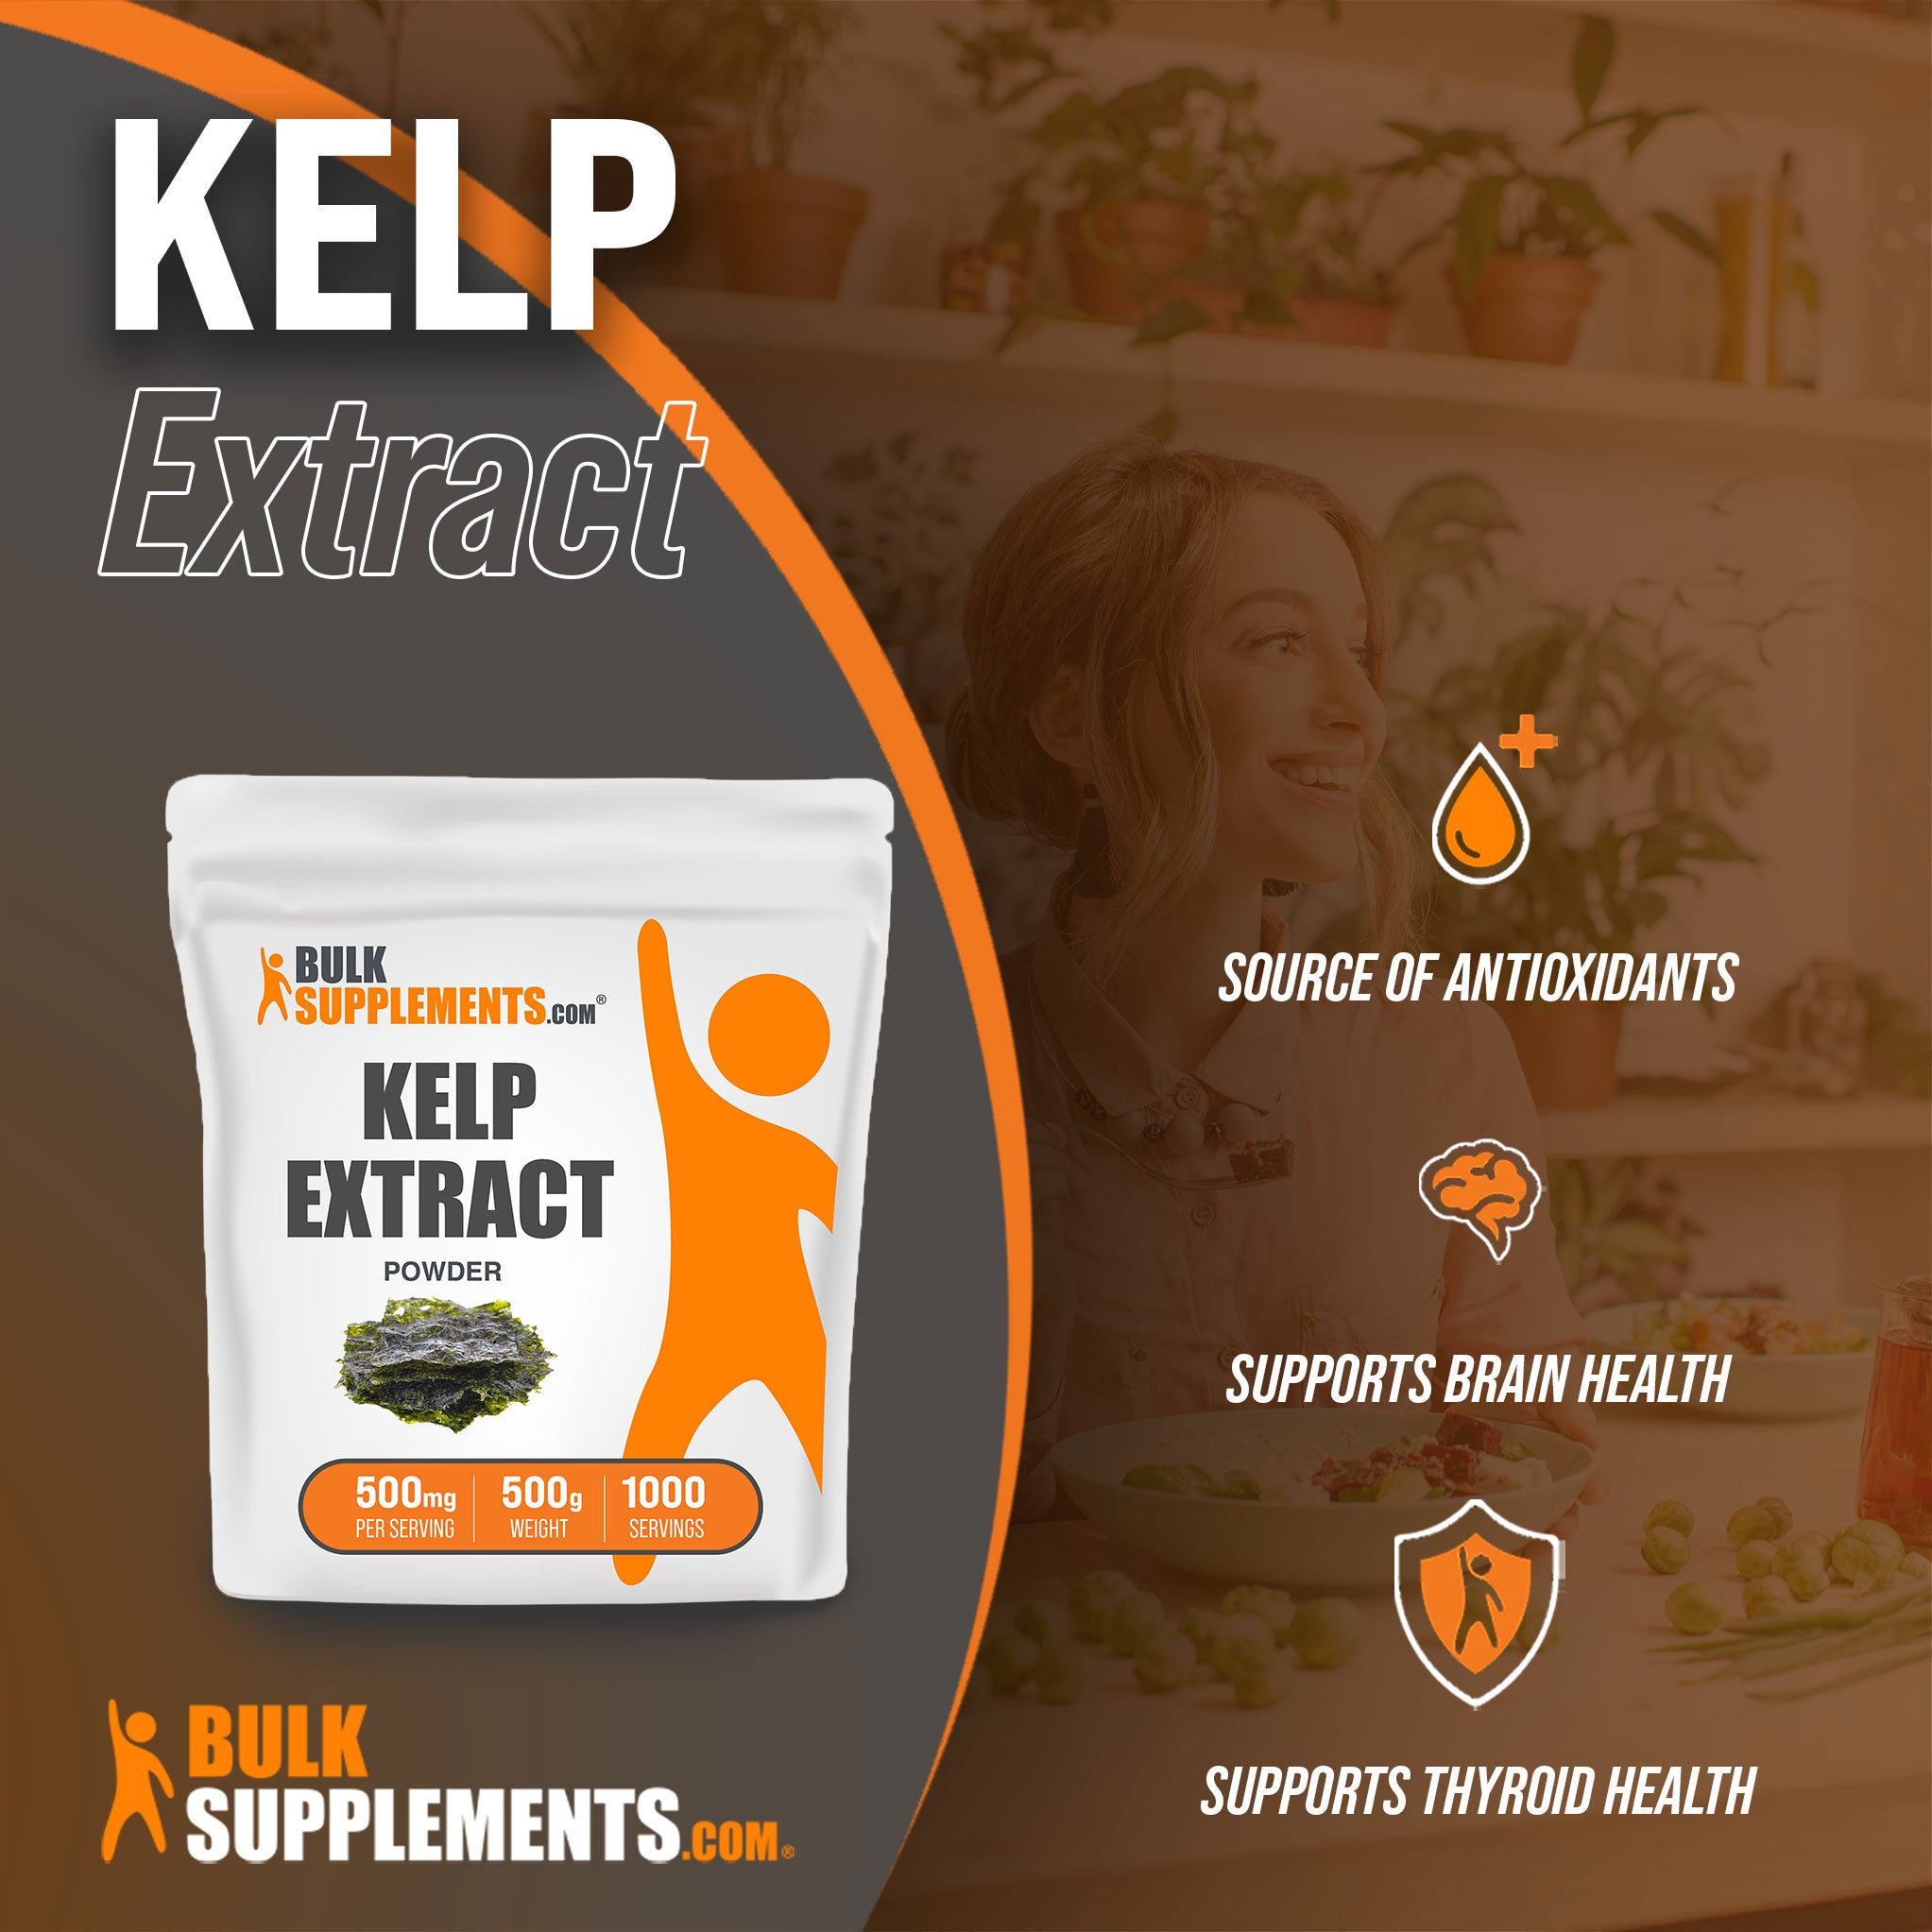 Benefits of Kelp Extract; source of antioxidants, supports brain health, supports thyroid health